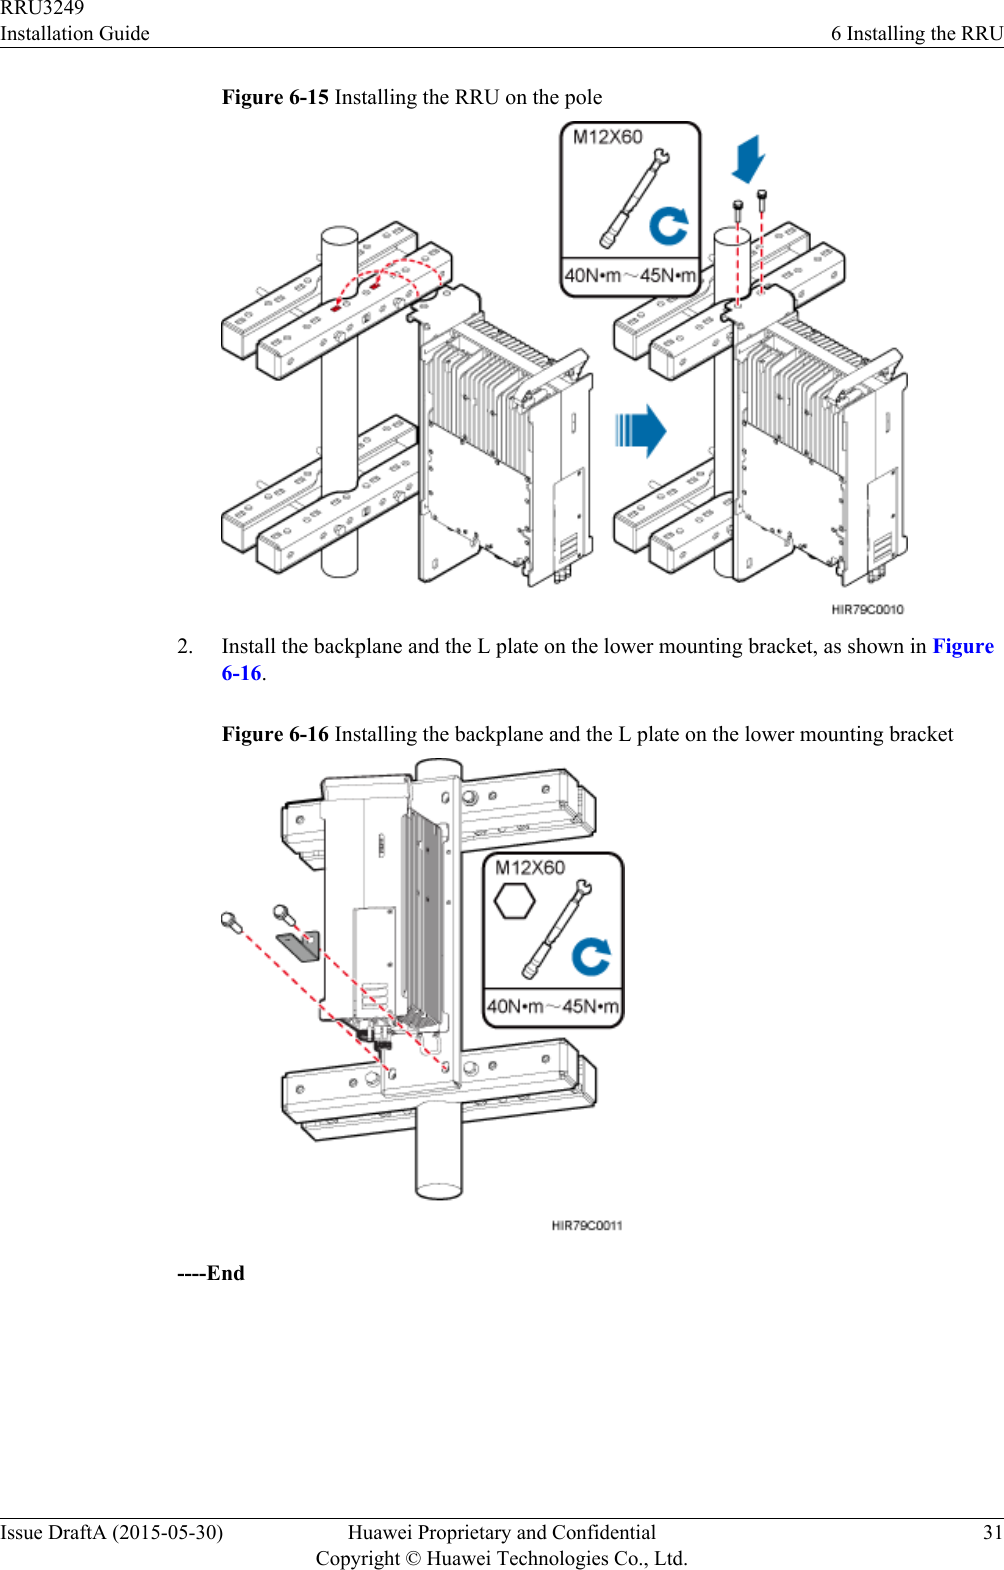 Figure 6-15 Installing the RRU on the pole2. Install the backplane and the L plate on the lower mounting bracket, as shown in Figure6-16.Figure 6-16 Installing the backplane and the L plate on the lower mounting bracket----EndRRU3249Installation Guide 6 Installing the RRUIssue DraftA (2015-05-30) Huawei Proprietary and ConfidentialCopyright © Huawei Technologies Co., Ltd.31